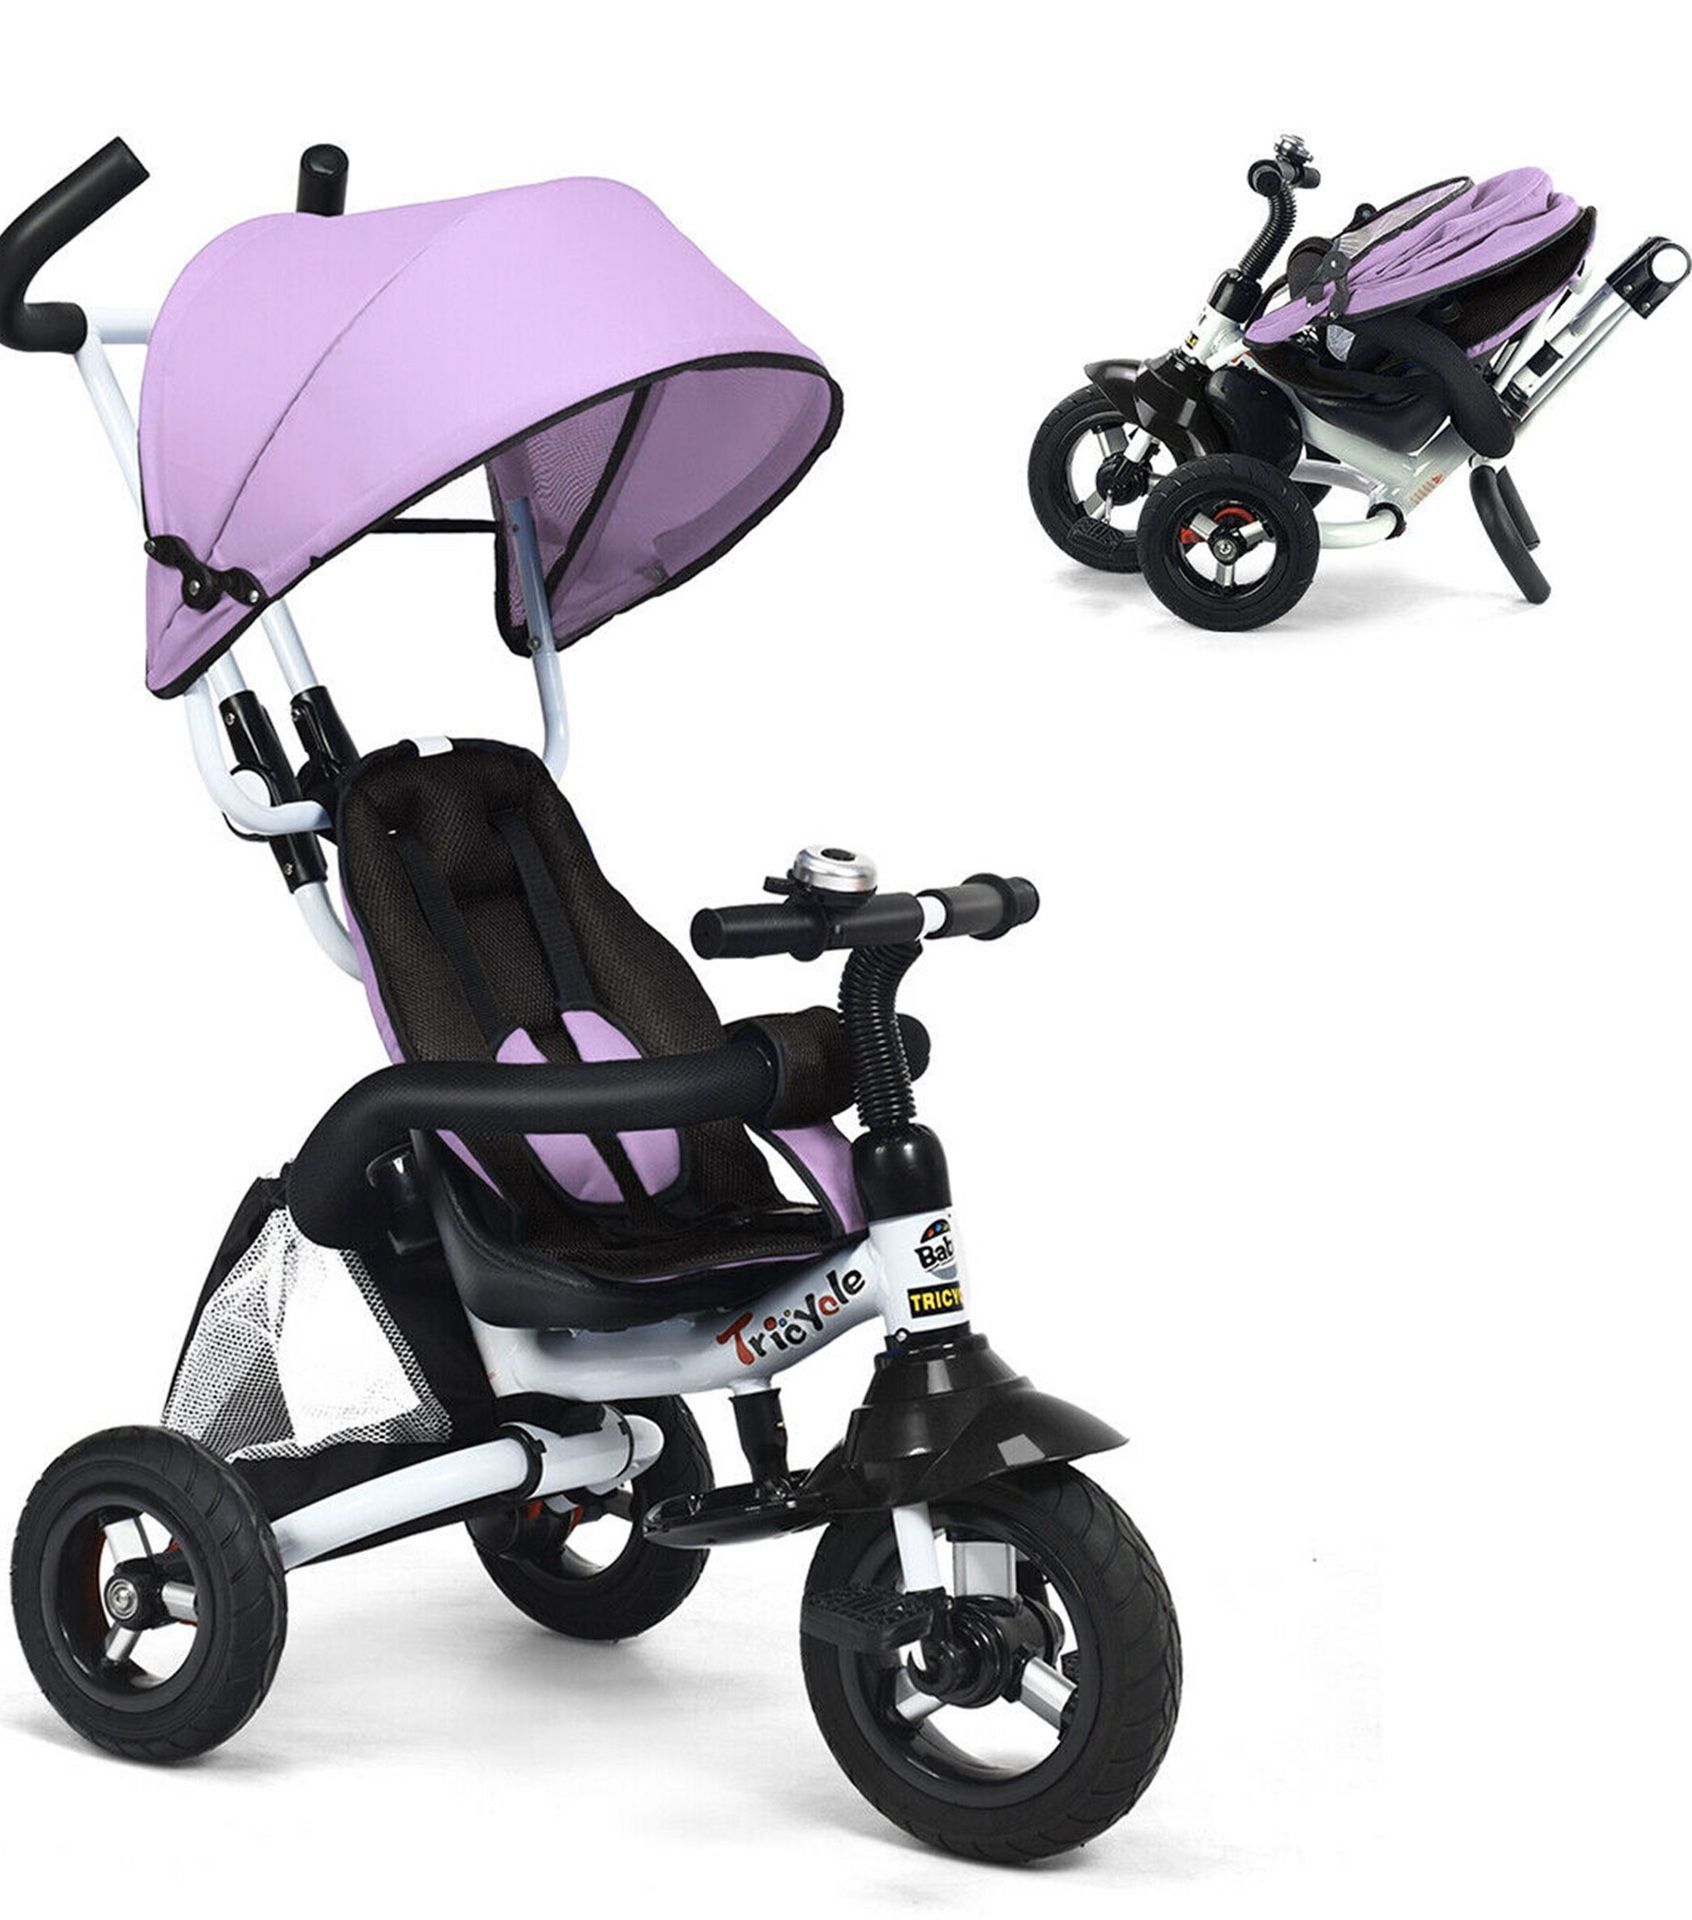 6-In-1 Kids Baby Stroller Tricycle Detachable Toddler Toy Bike w/ Canopy Bag